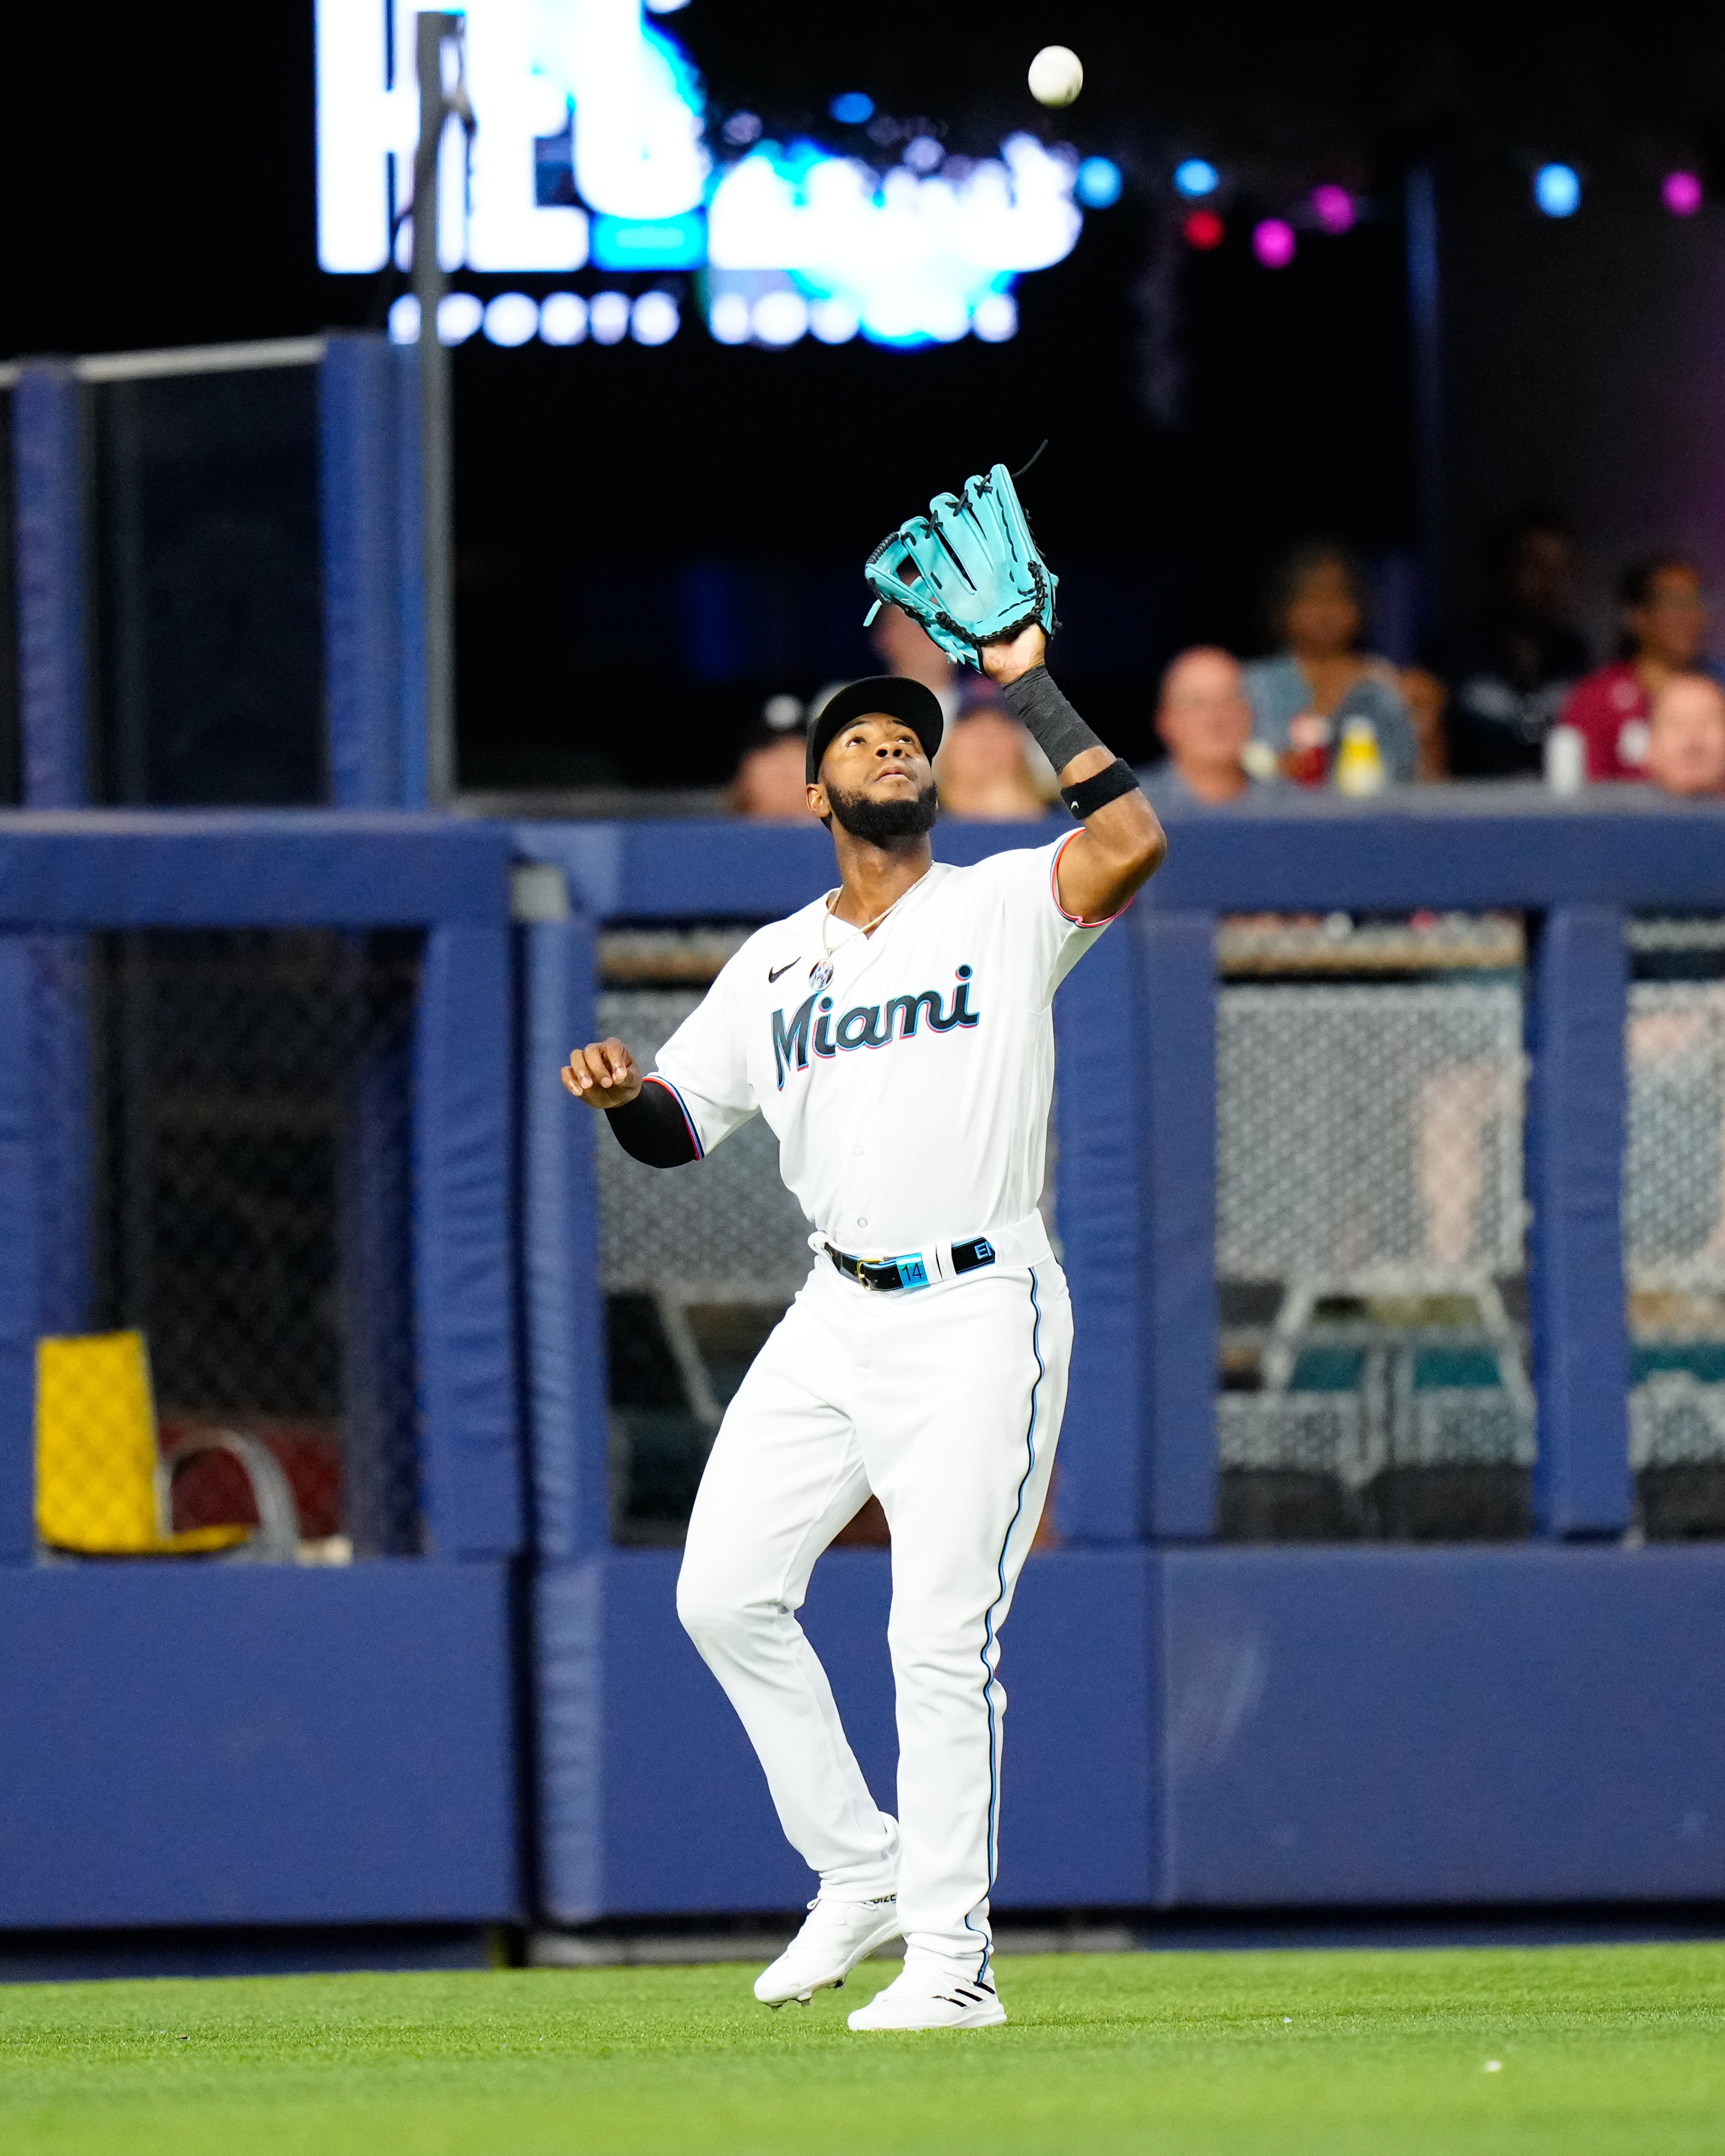 Jazz Chisholm Jr. shows out as Marlins take series against Giants